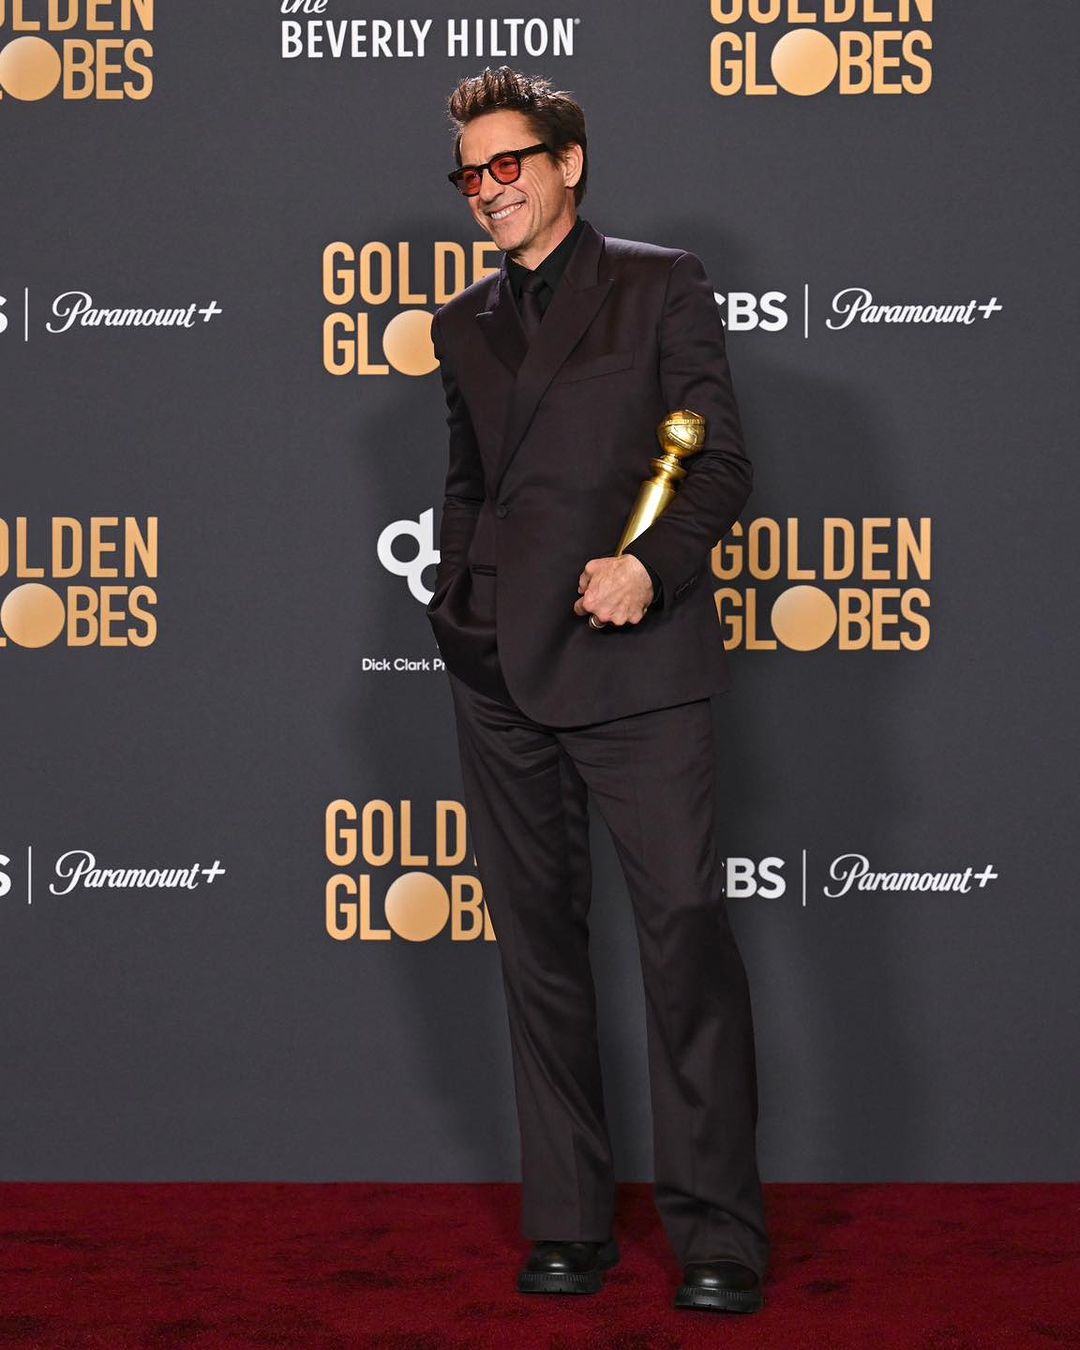 Robert Downey Jr. in a burgundy suit by Dior